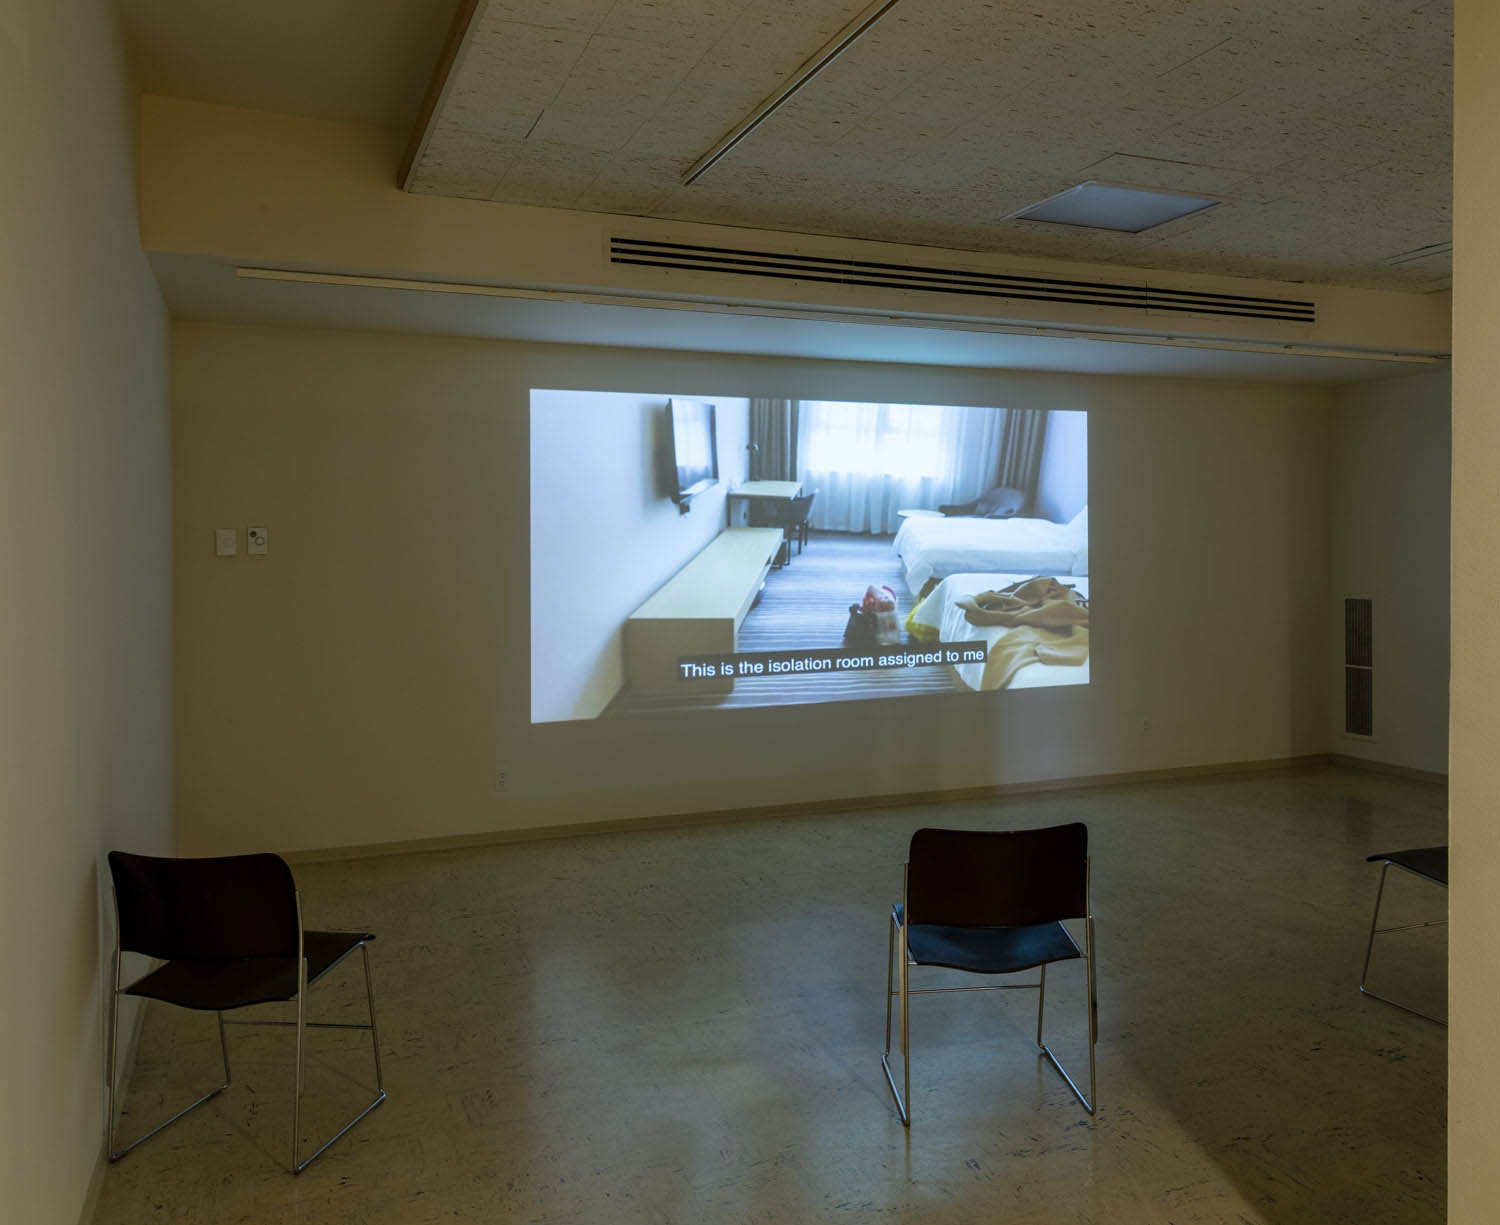 view of the museum's gallery showing the projection of a hotel room and two black chairs